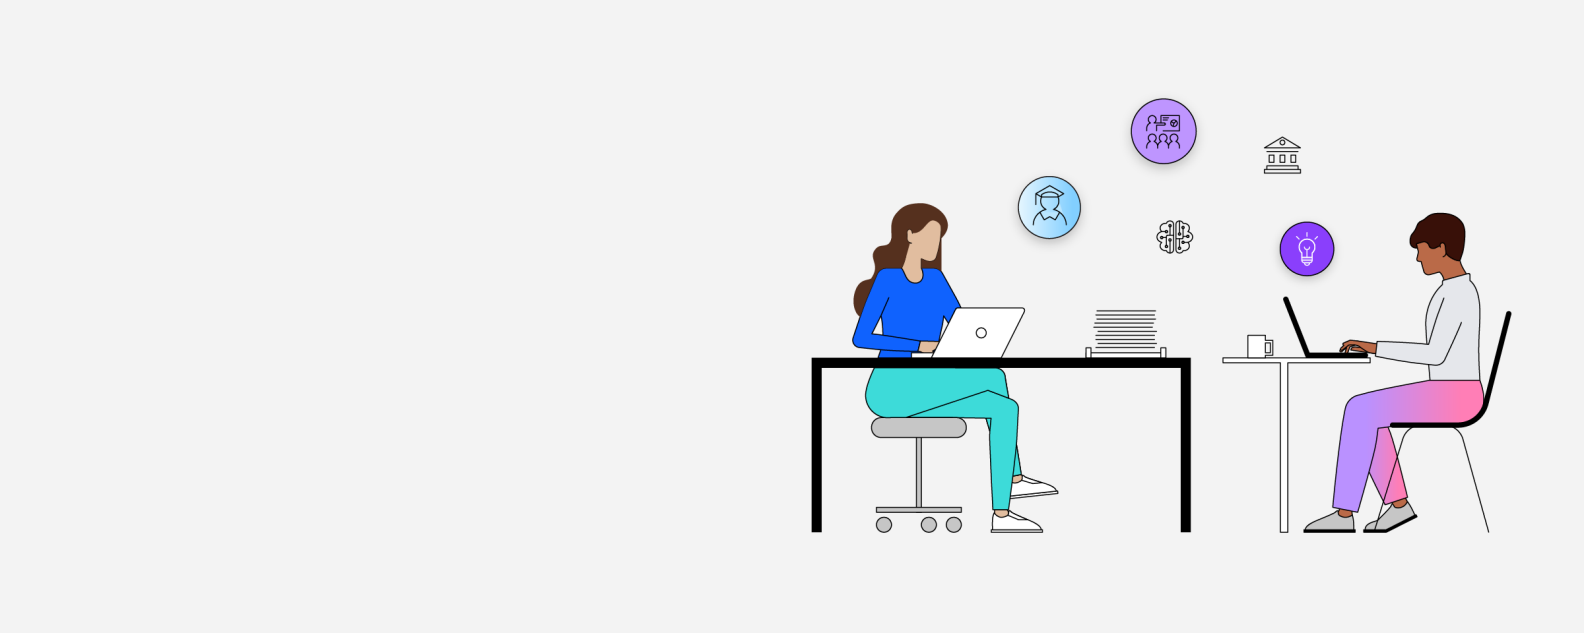 Illustration showing 2 people working on a laptop